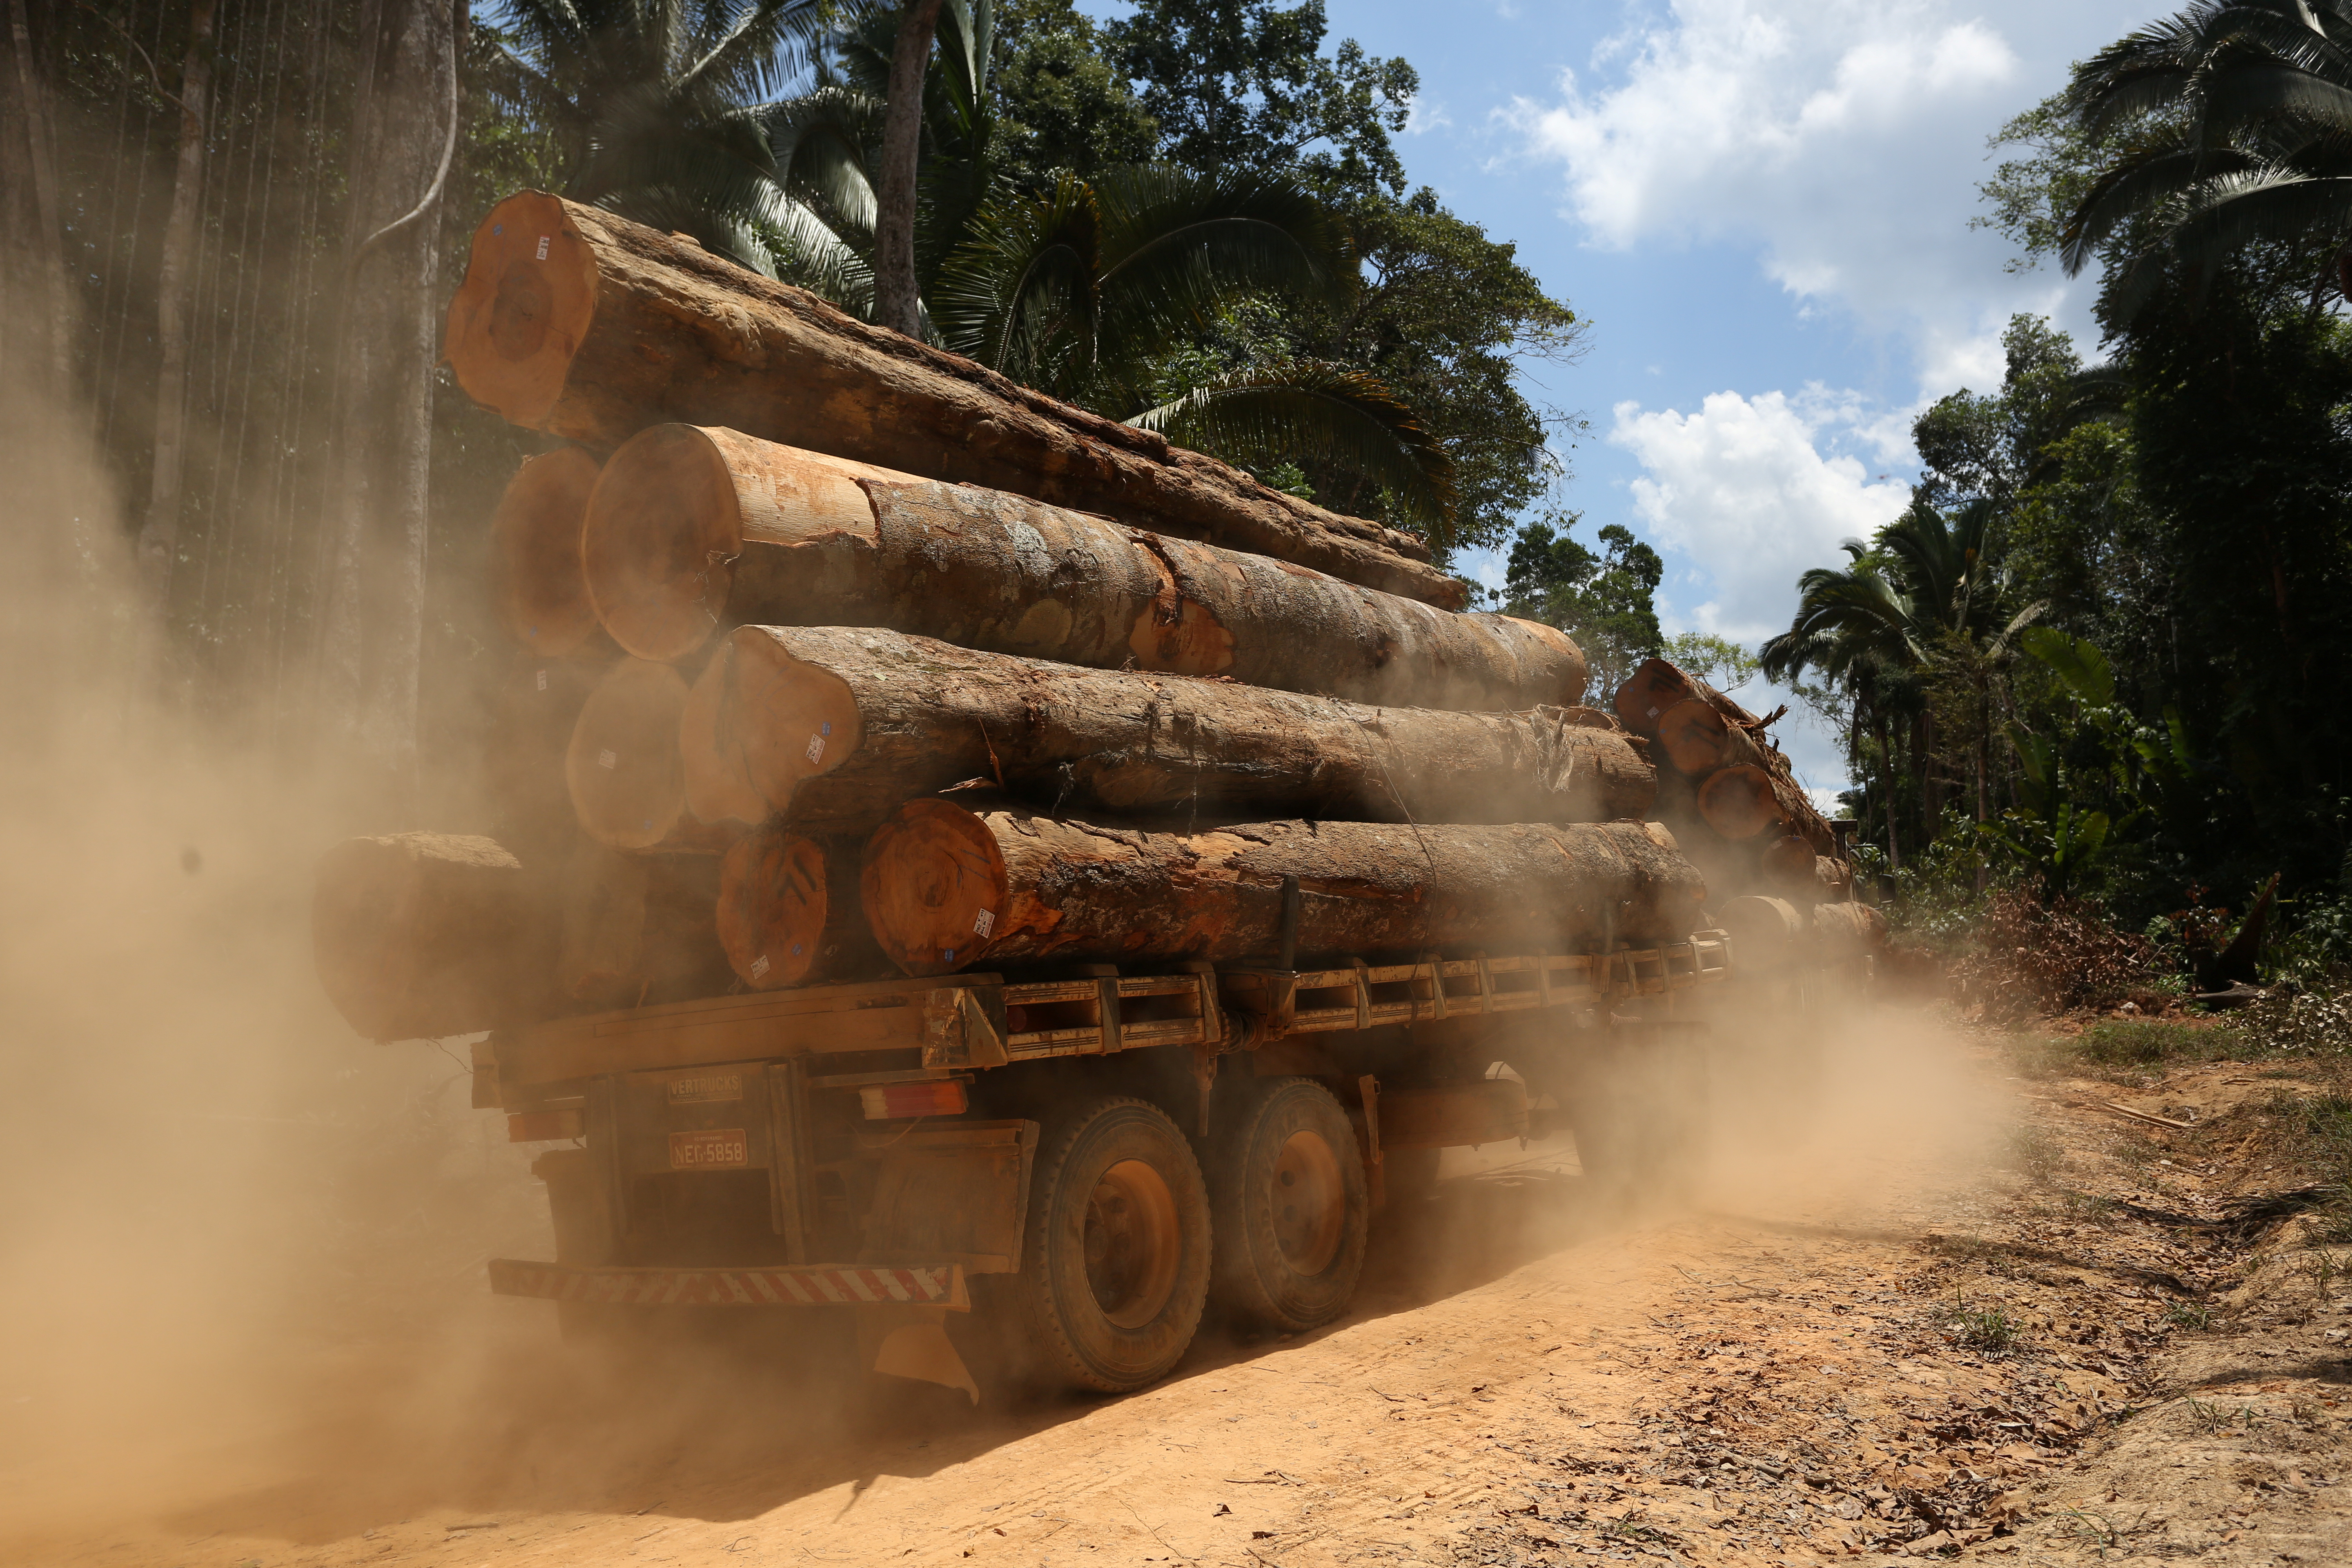 A truck is seen loaded with logs cut from the Bom Retiro deforestation area